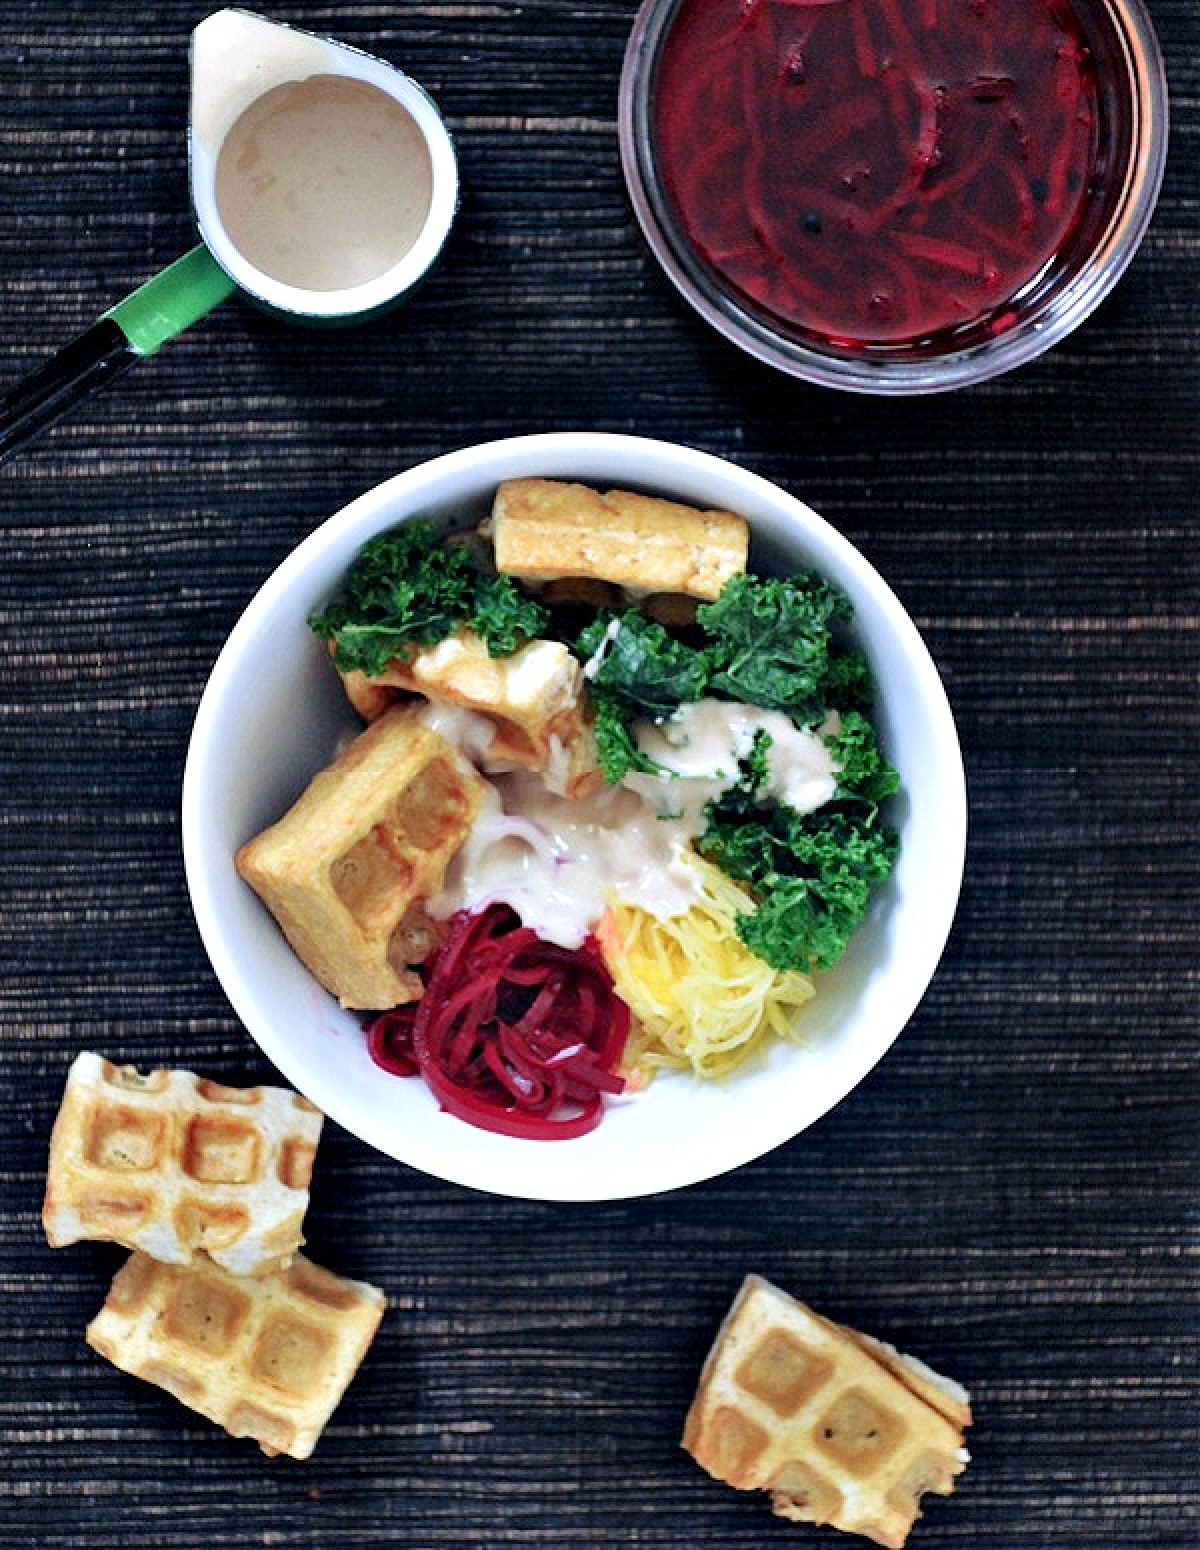 Overhead view of a veggie bowl with waffled tofu (spaghetti squash, roasted beet ribbons, marinated kale, and tofu cooked in the waffle maker) with a tahini sauce drizzled over top.